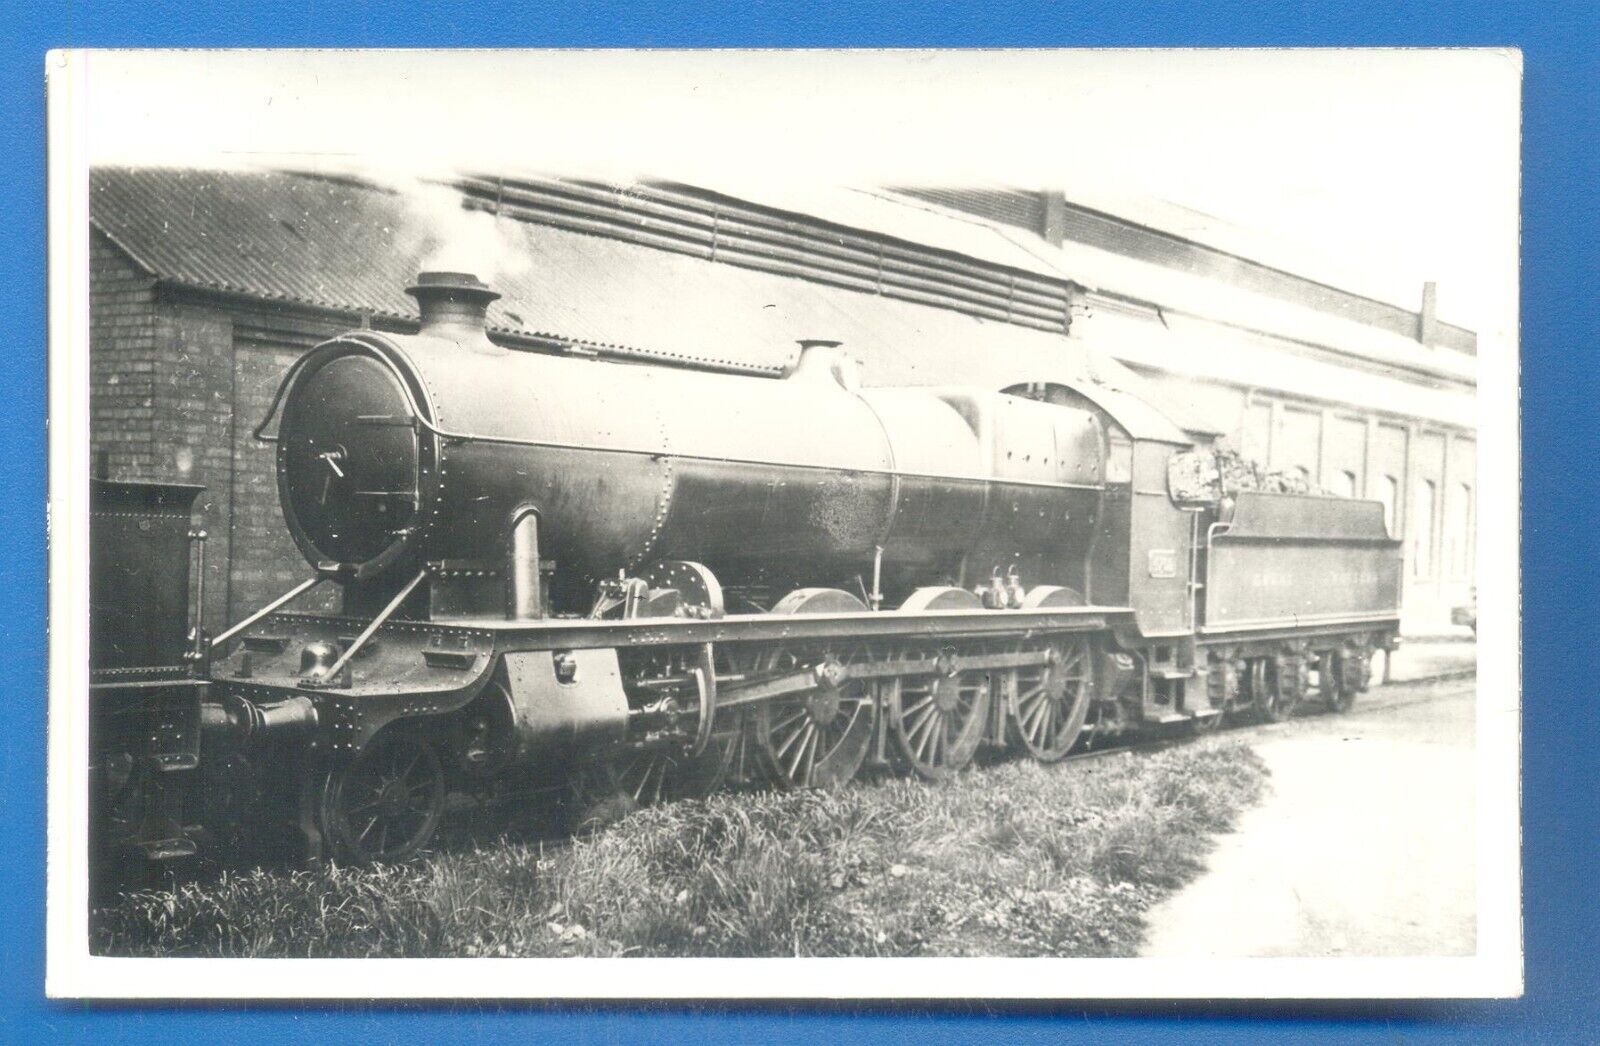 4702 AT OLD OAK COMMON 16/5/25.PHOTOGRAPH 9 x 14cms